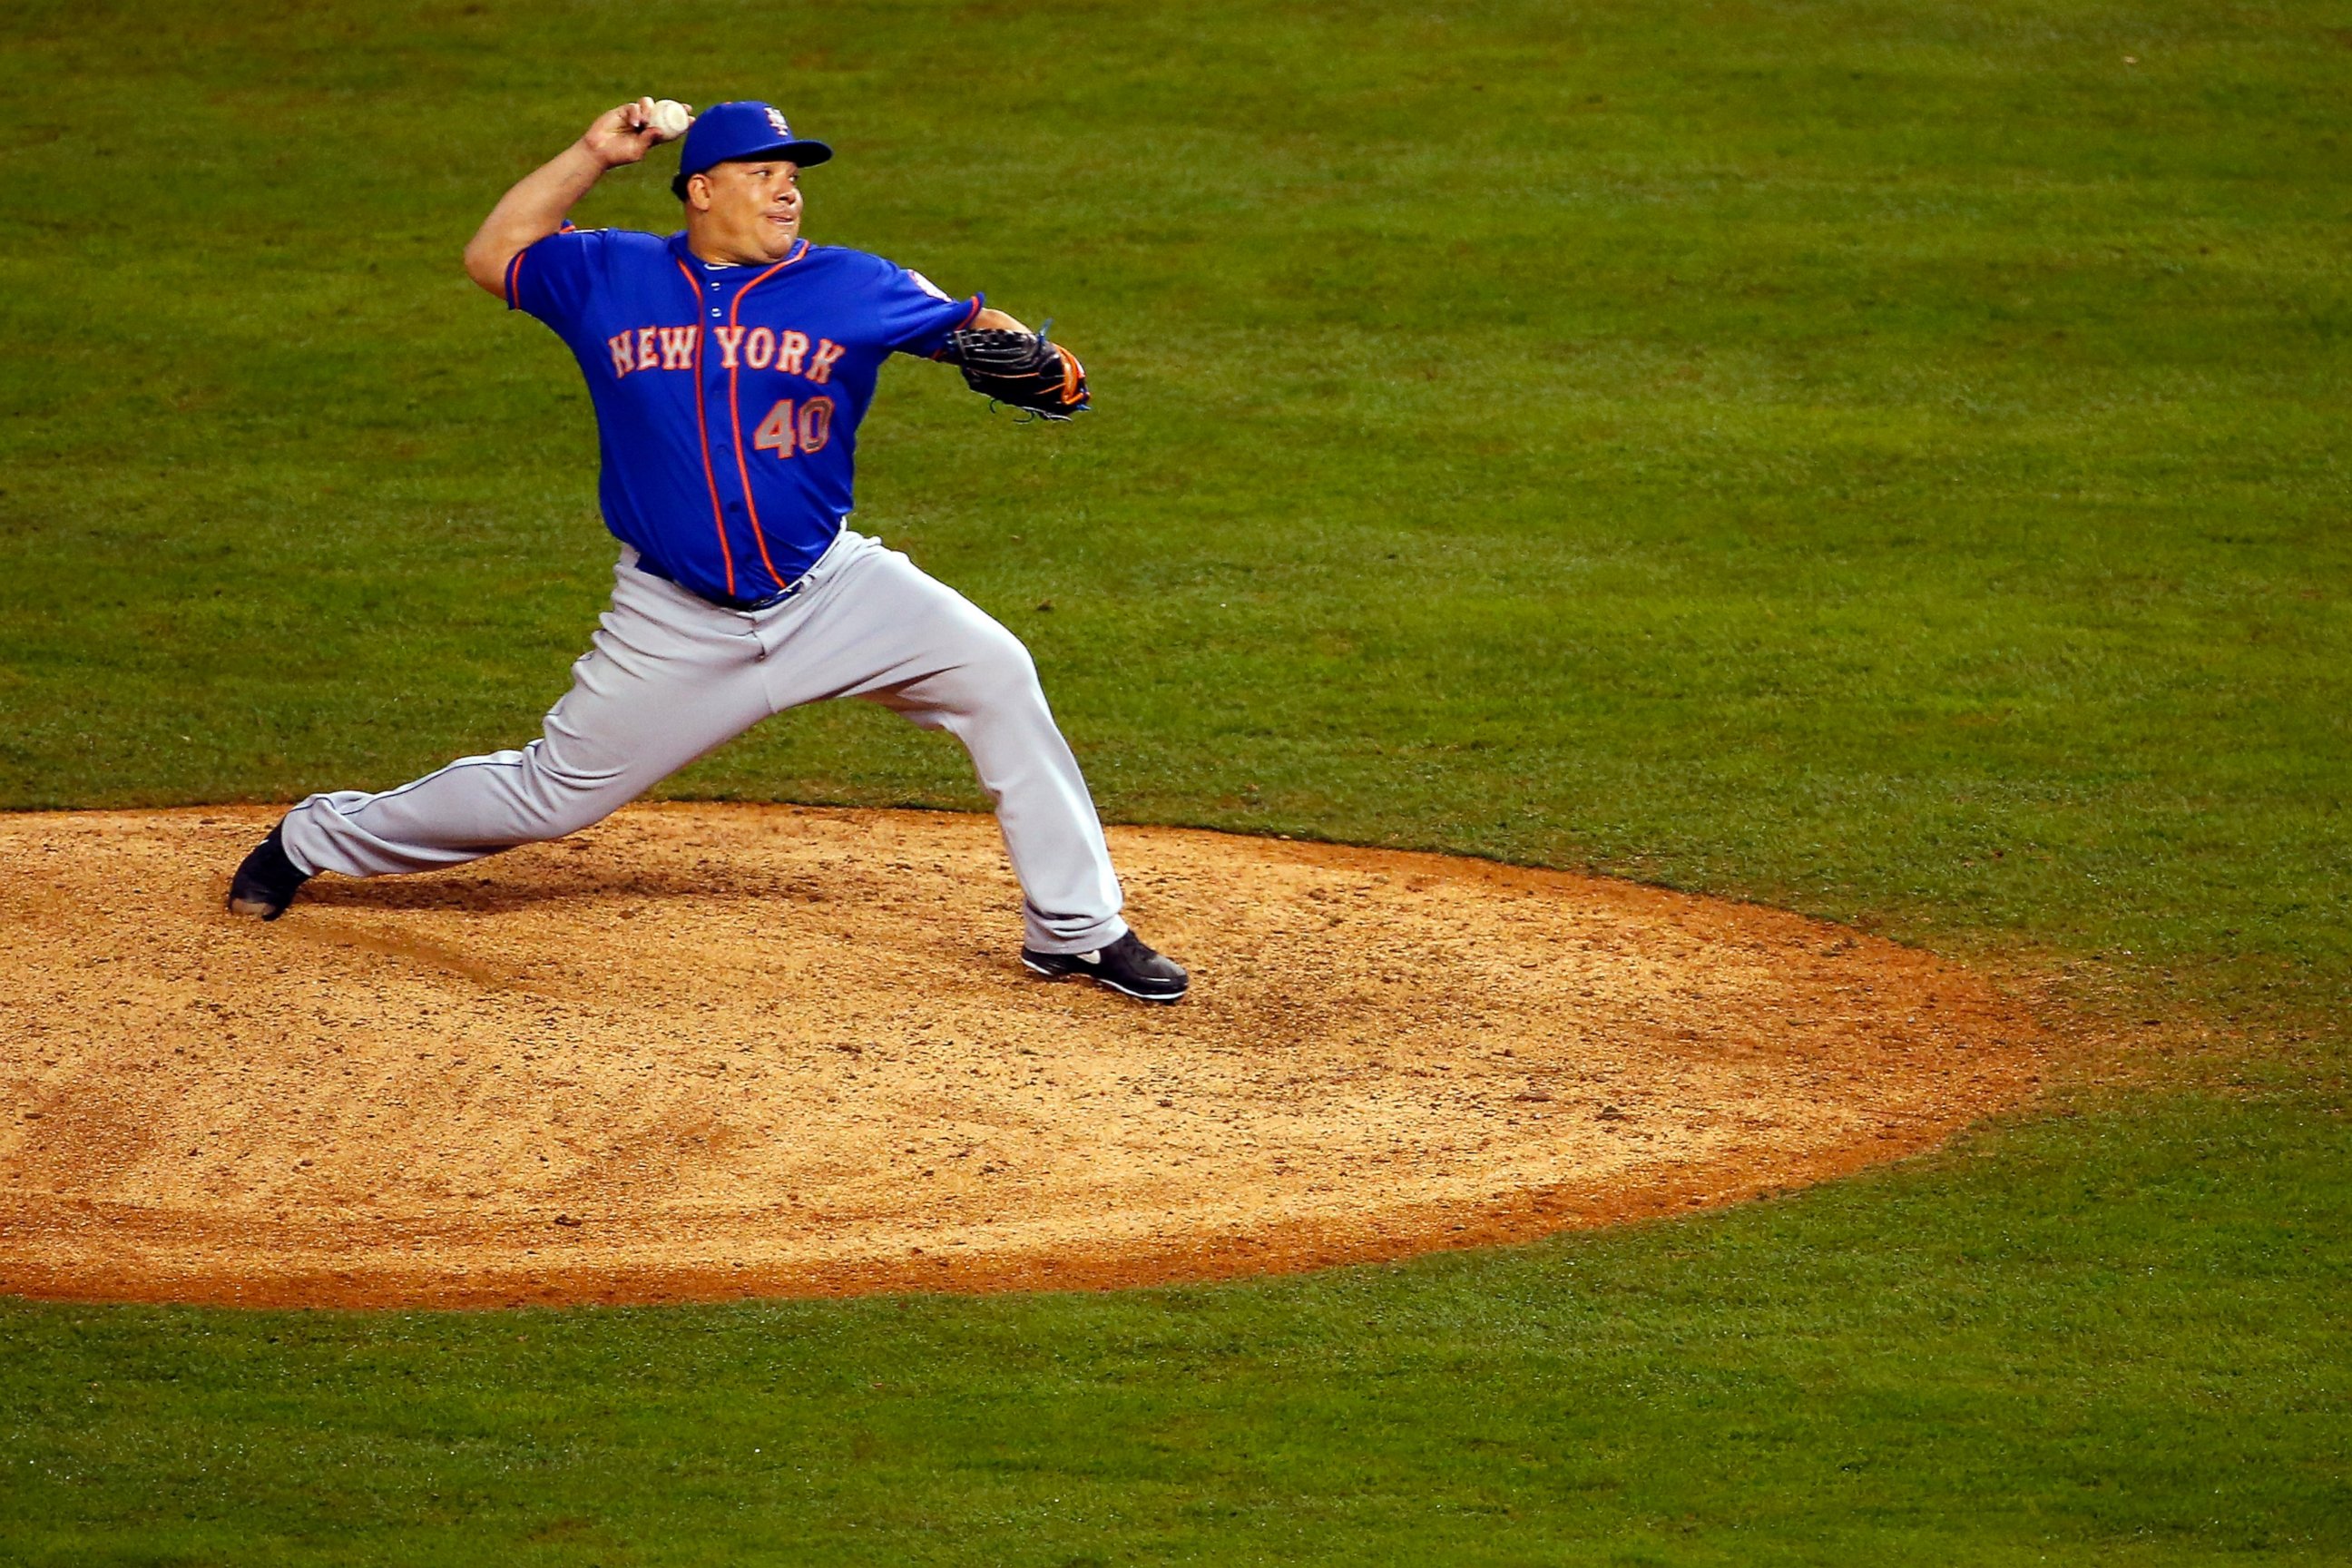 PHOTO: Bartolo Colon of the New York Mets throws a pitch in the twelfth inning against the Kansas City Royals during Game One of the 2015 World Series at Kauffman Stadium on October 27, 2015 in Kansas City, Missouri.